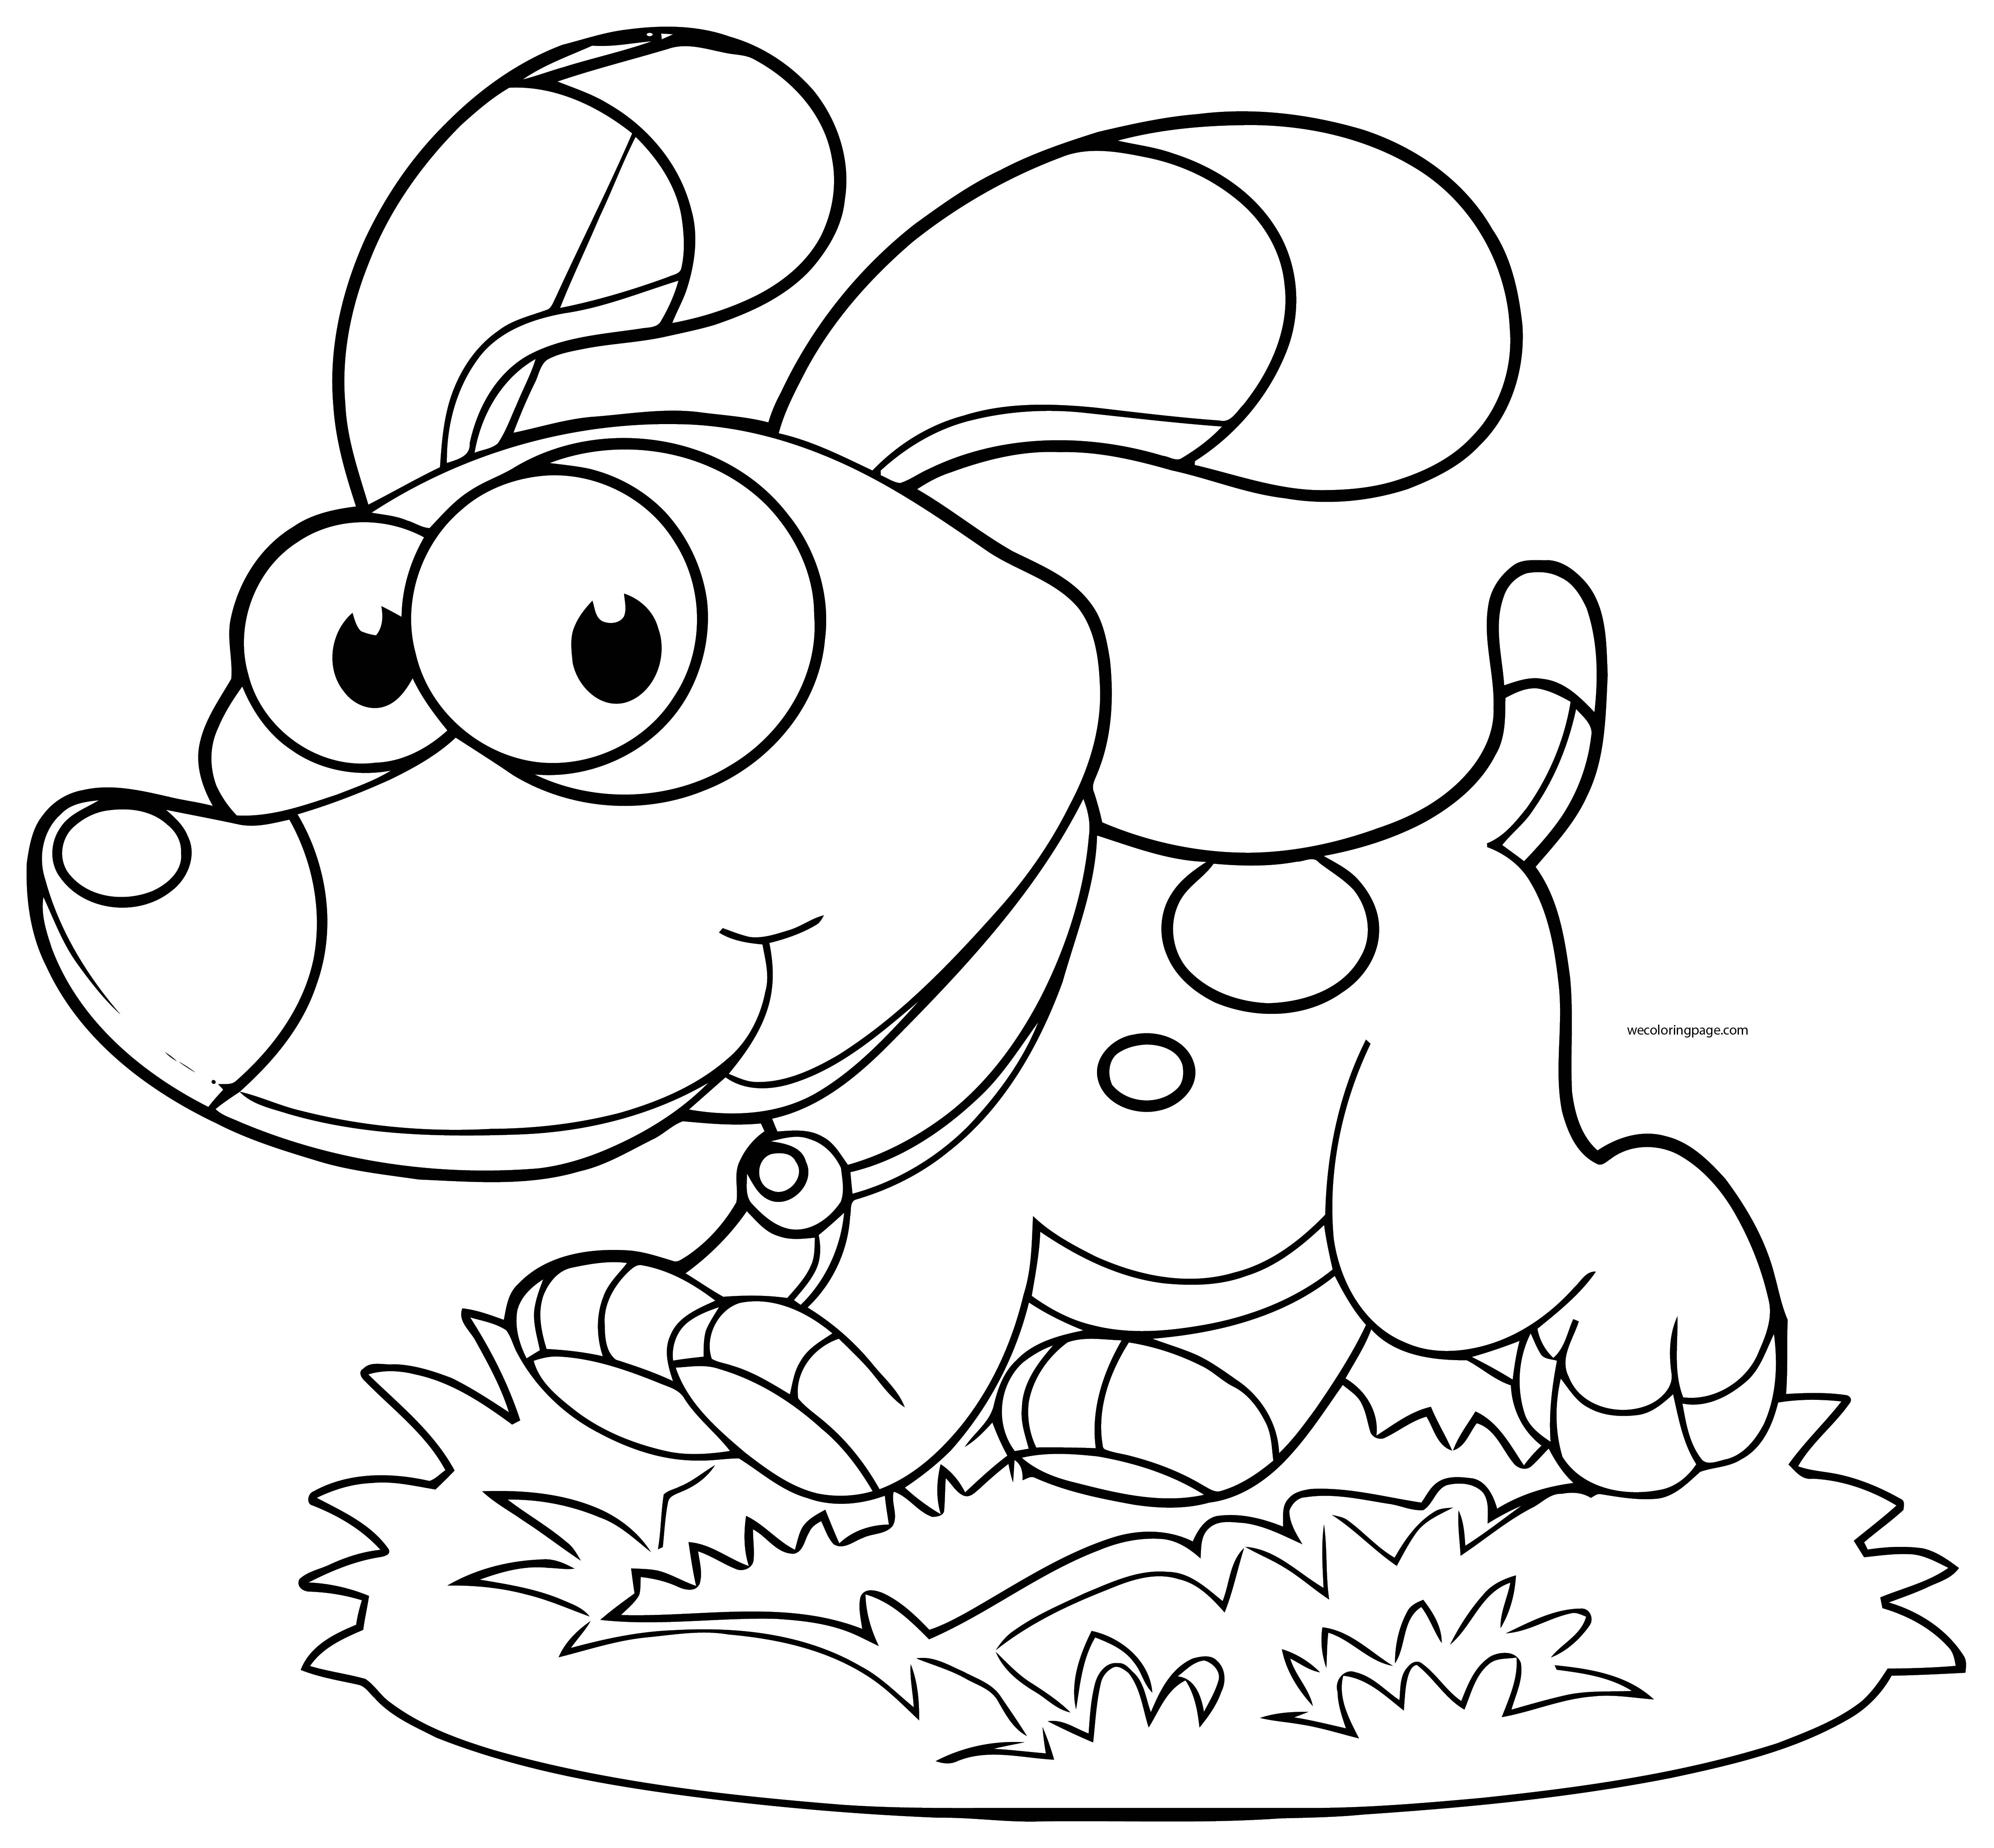 Dog Coloring Pages 040 | Wecoloringpage.com